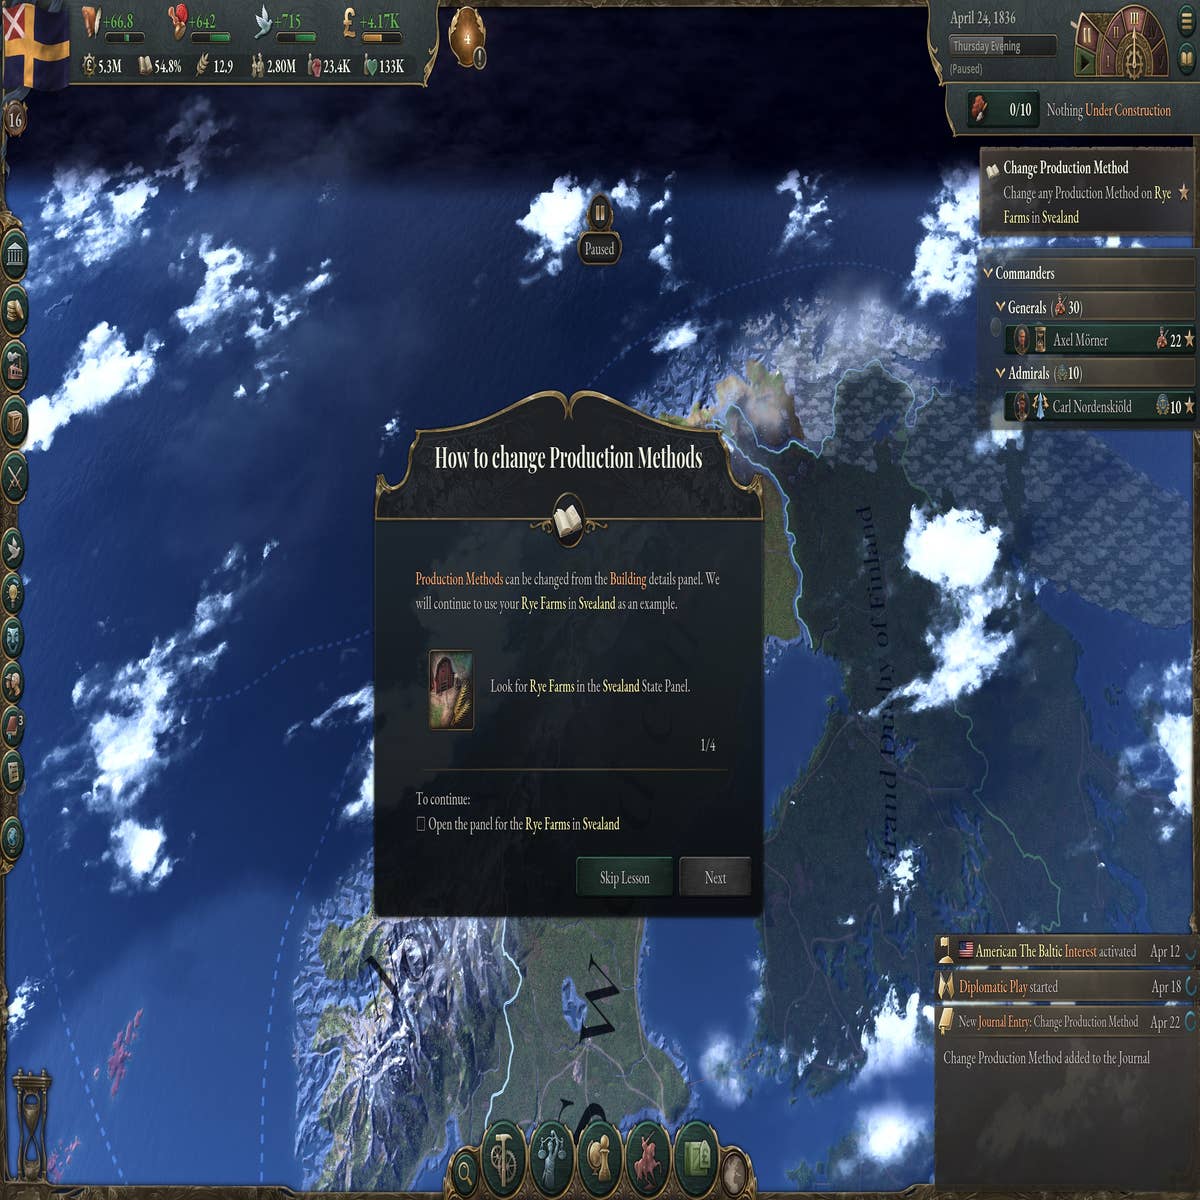 New Paradox game Victoria 3 spanning 1836-1930 has some interesting  treatment of NZ : r/newzealand